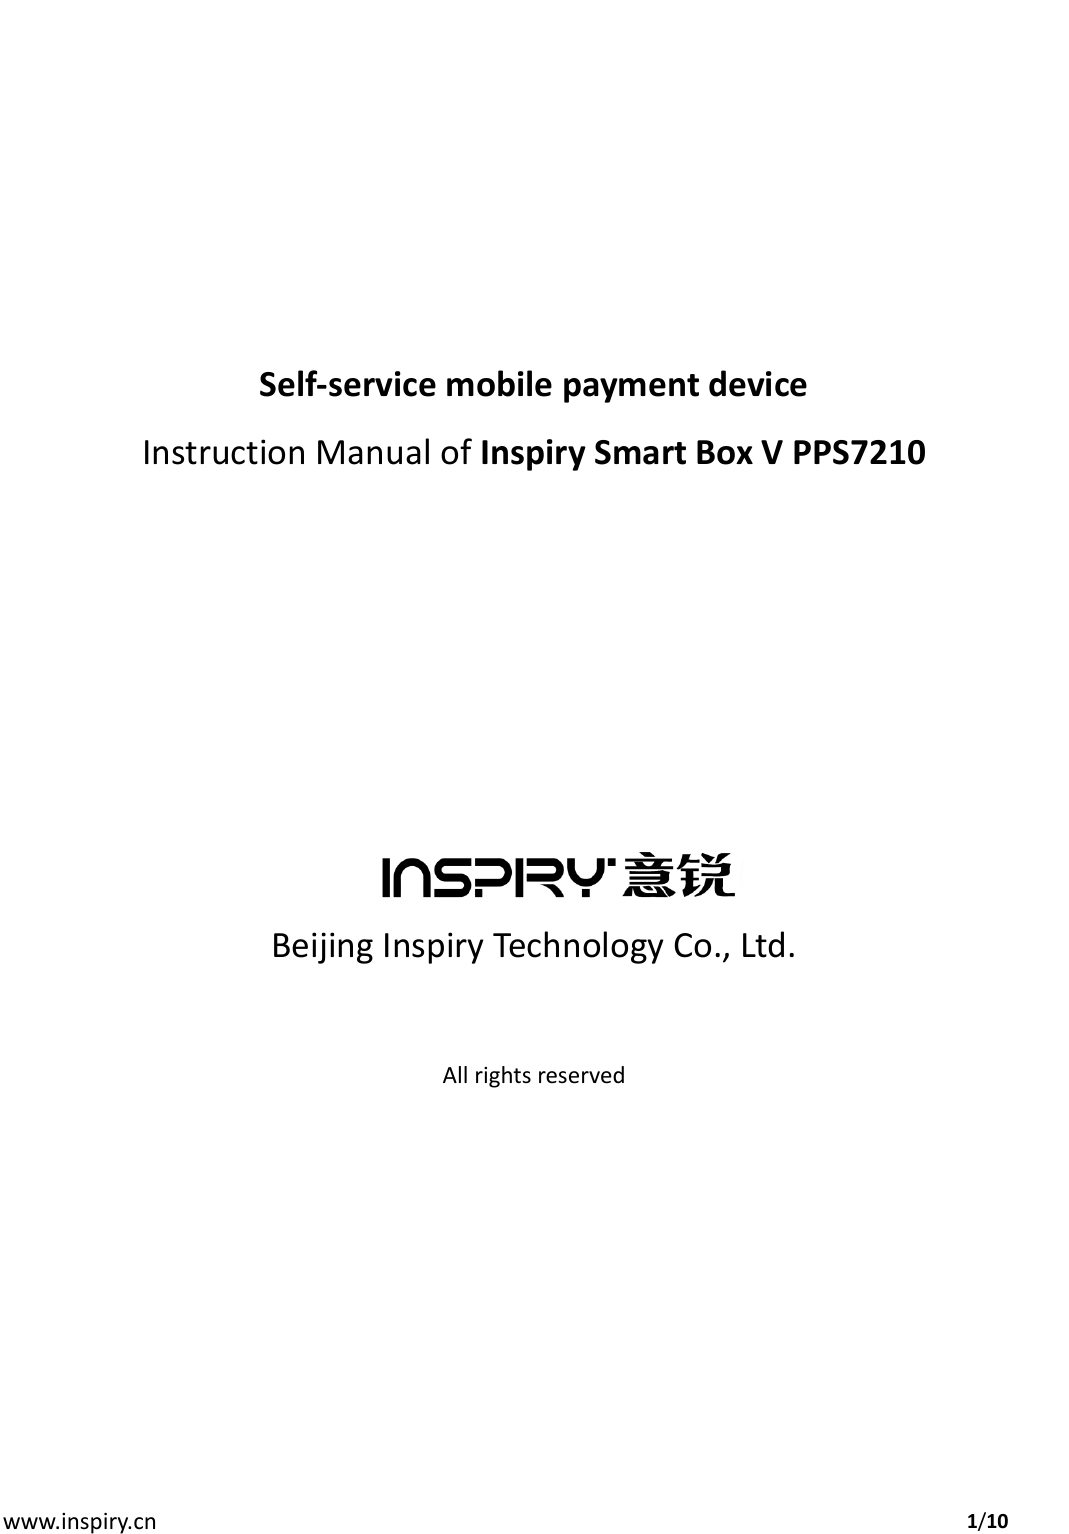  www.inspiry.cn                                                                          1/10         Self-service mobile payment device Instruction Manual of Inspiry Smart Box V PPS7210         Beijing Inspiry Technology Co., Ltd.  All rights reserved     